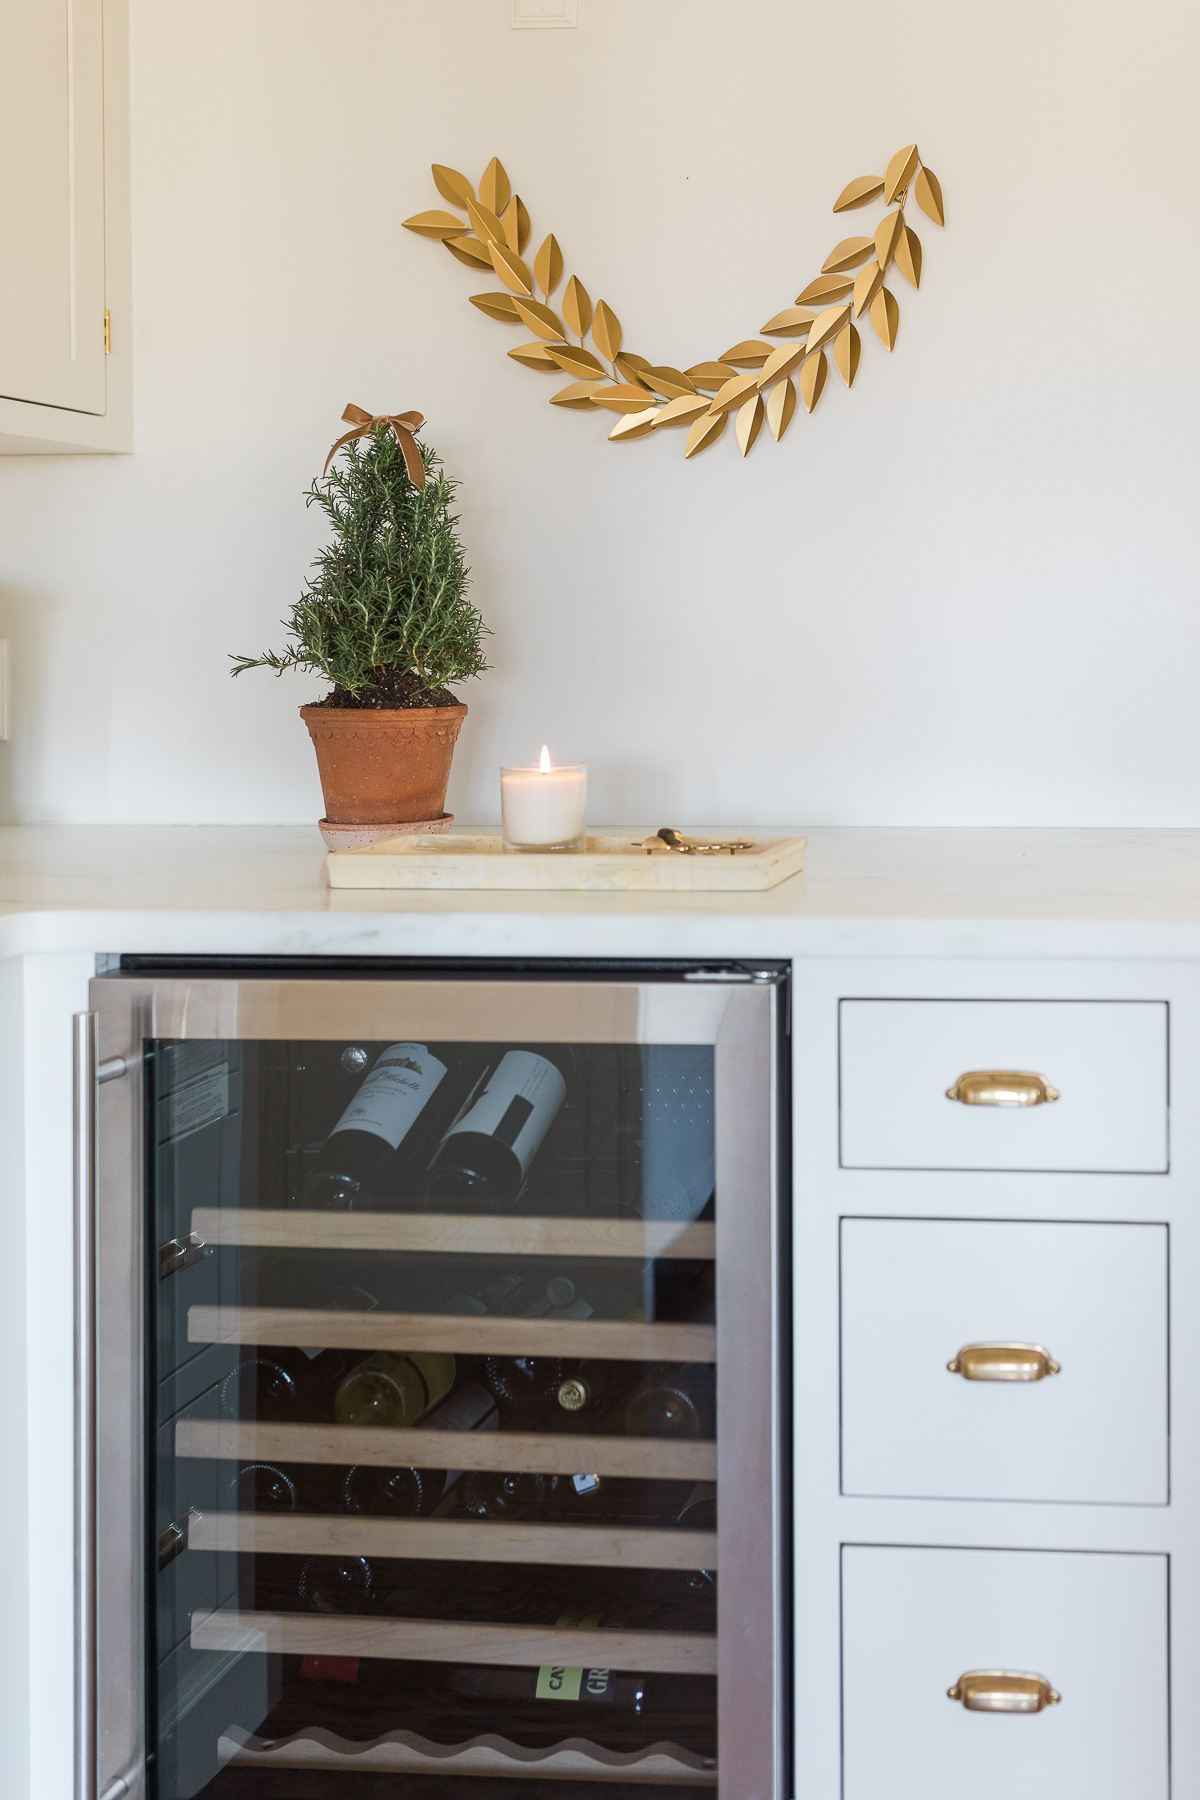 A wine cooler in a white kitchen adorned with a gold laurel wreath accent.